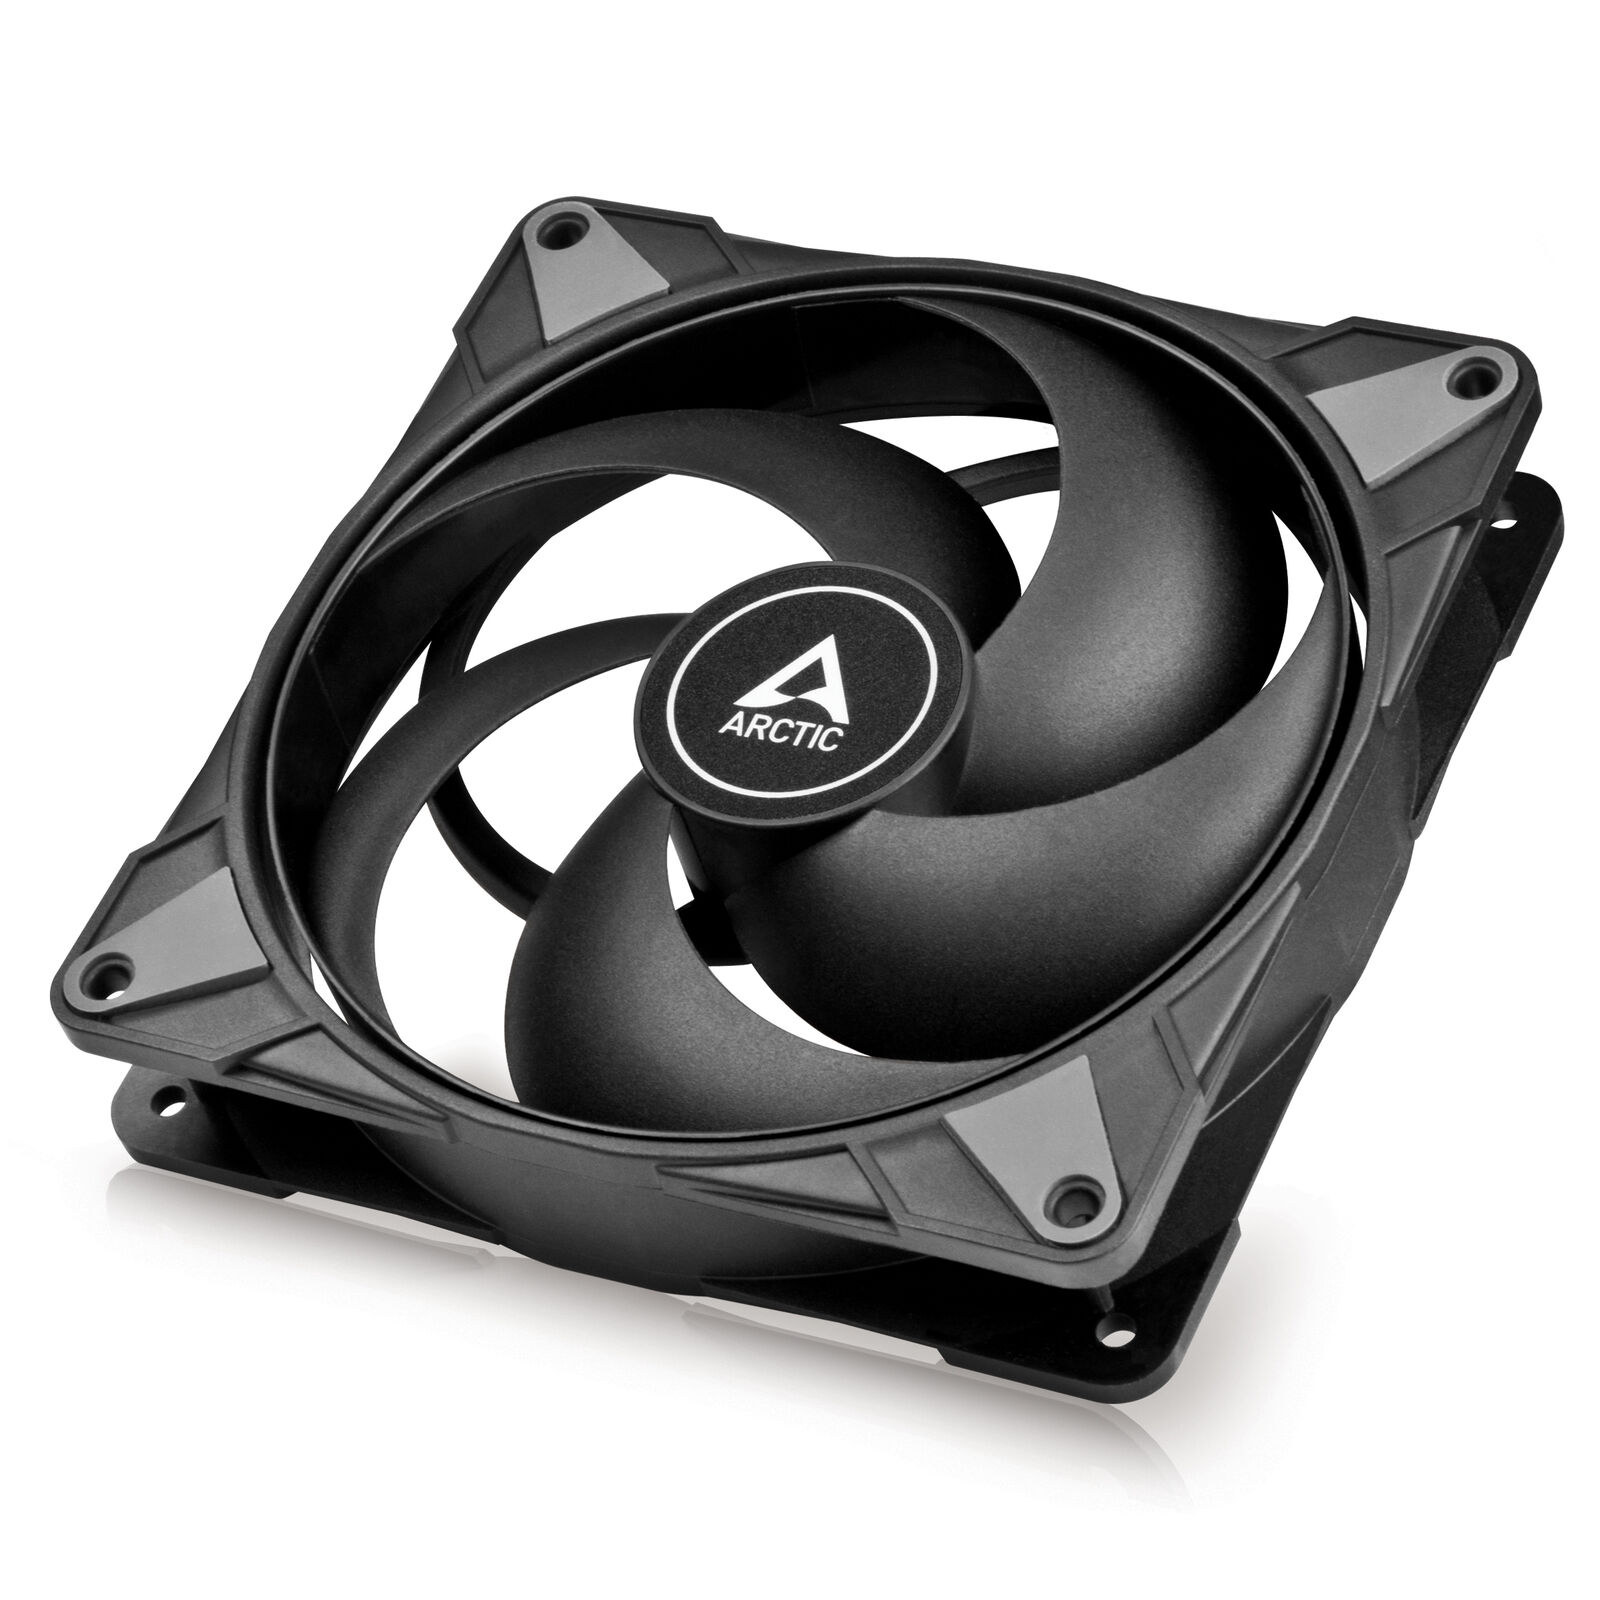 ARCTIC P14 Max PC Case Fan High-Performance 140 mm PWM controlled B-Stock